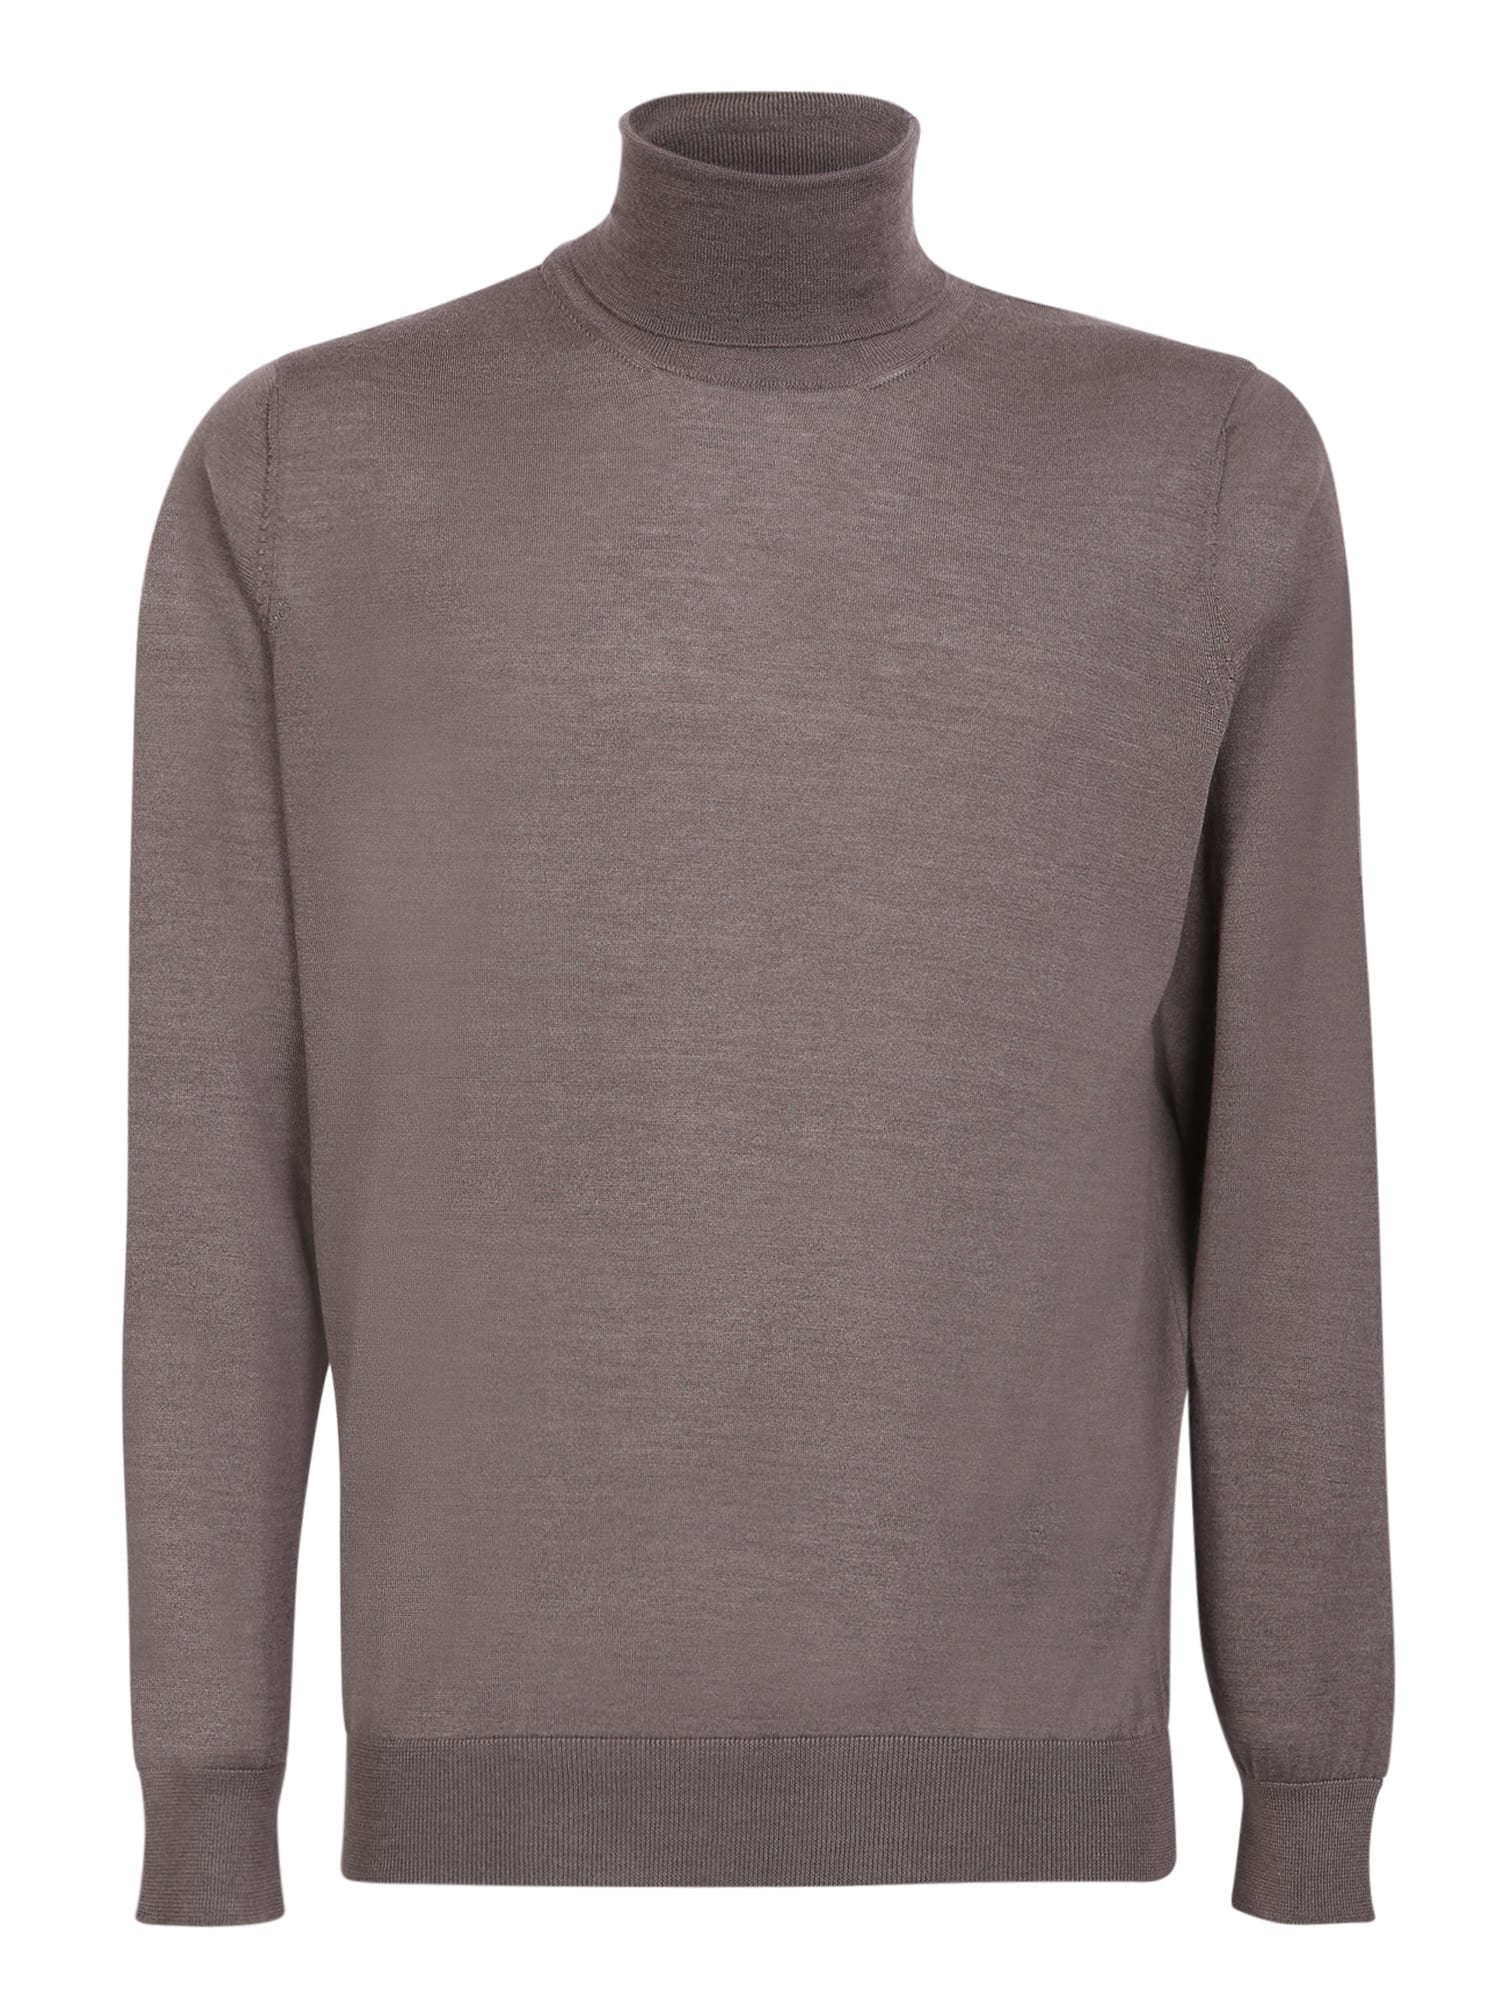 Colombo Beige Wool And Cashmere Sweater